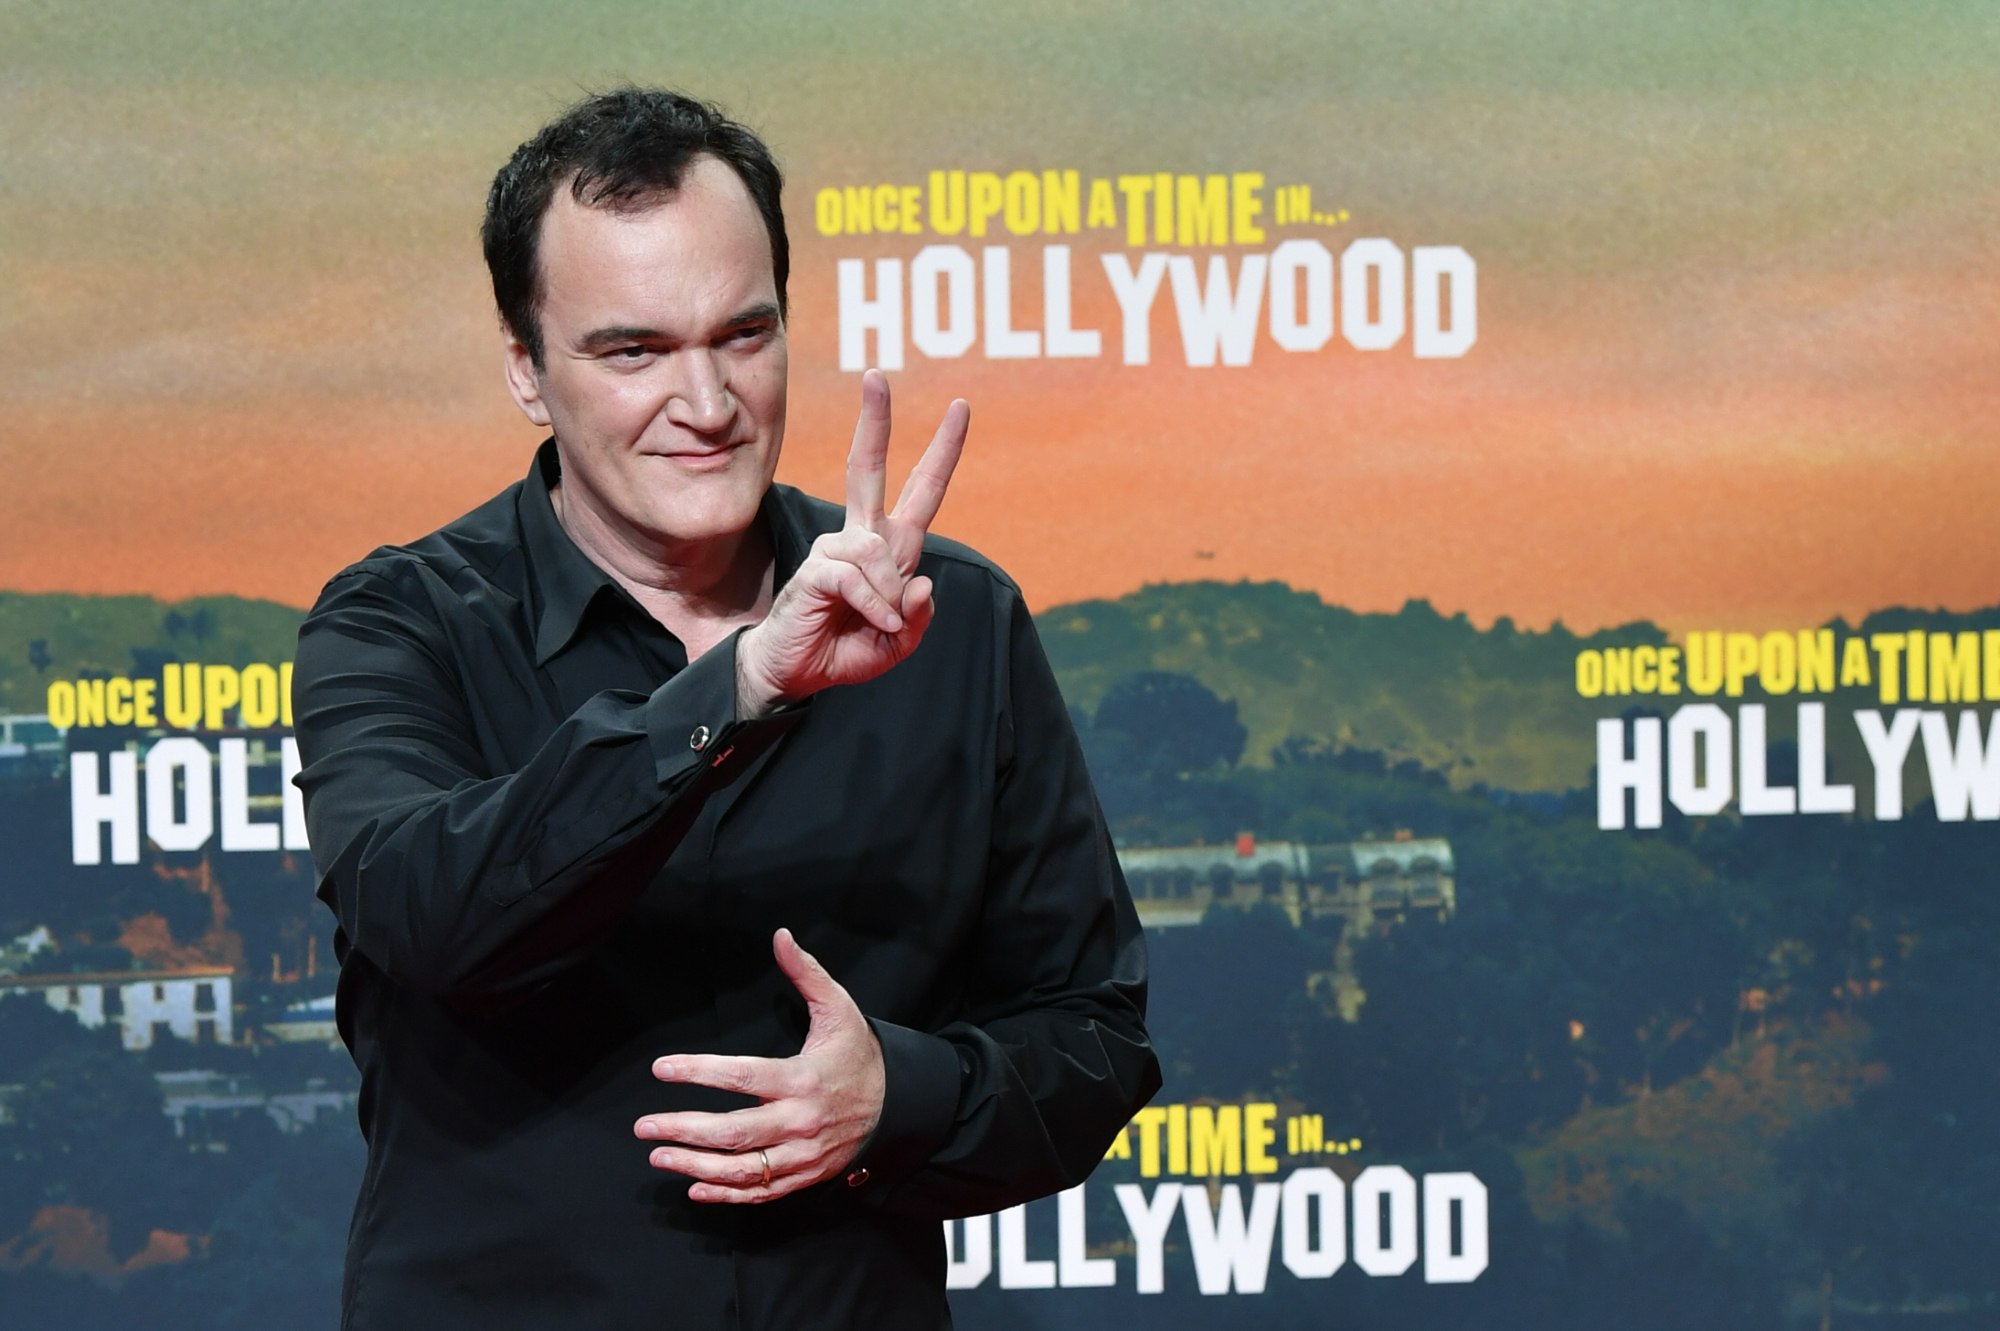 'Once Upon a Time in Hollywood' filmmaker Quentin Tarantino in article about beer holding up a peace sign